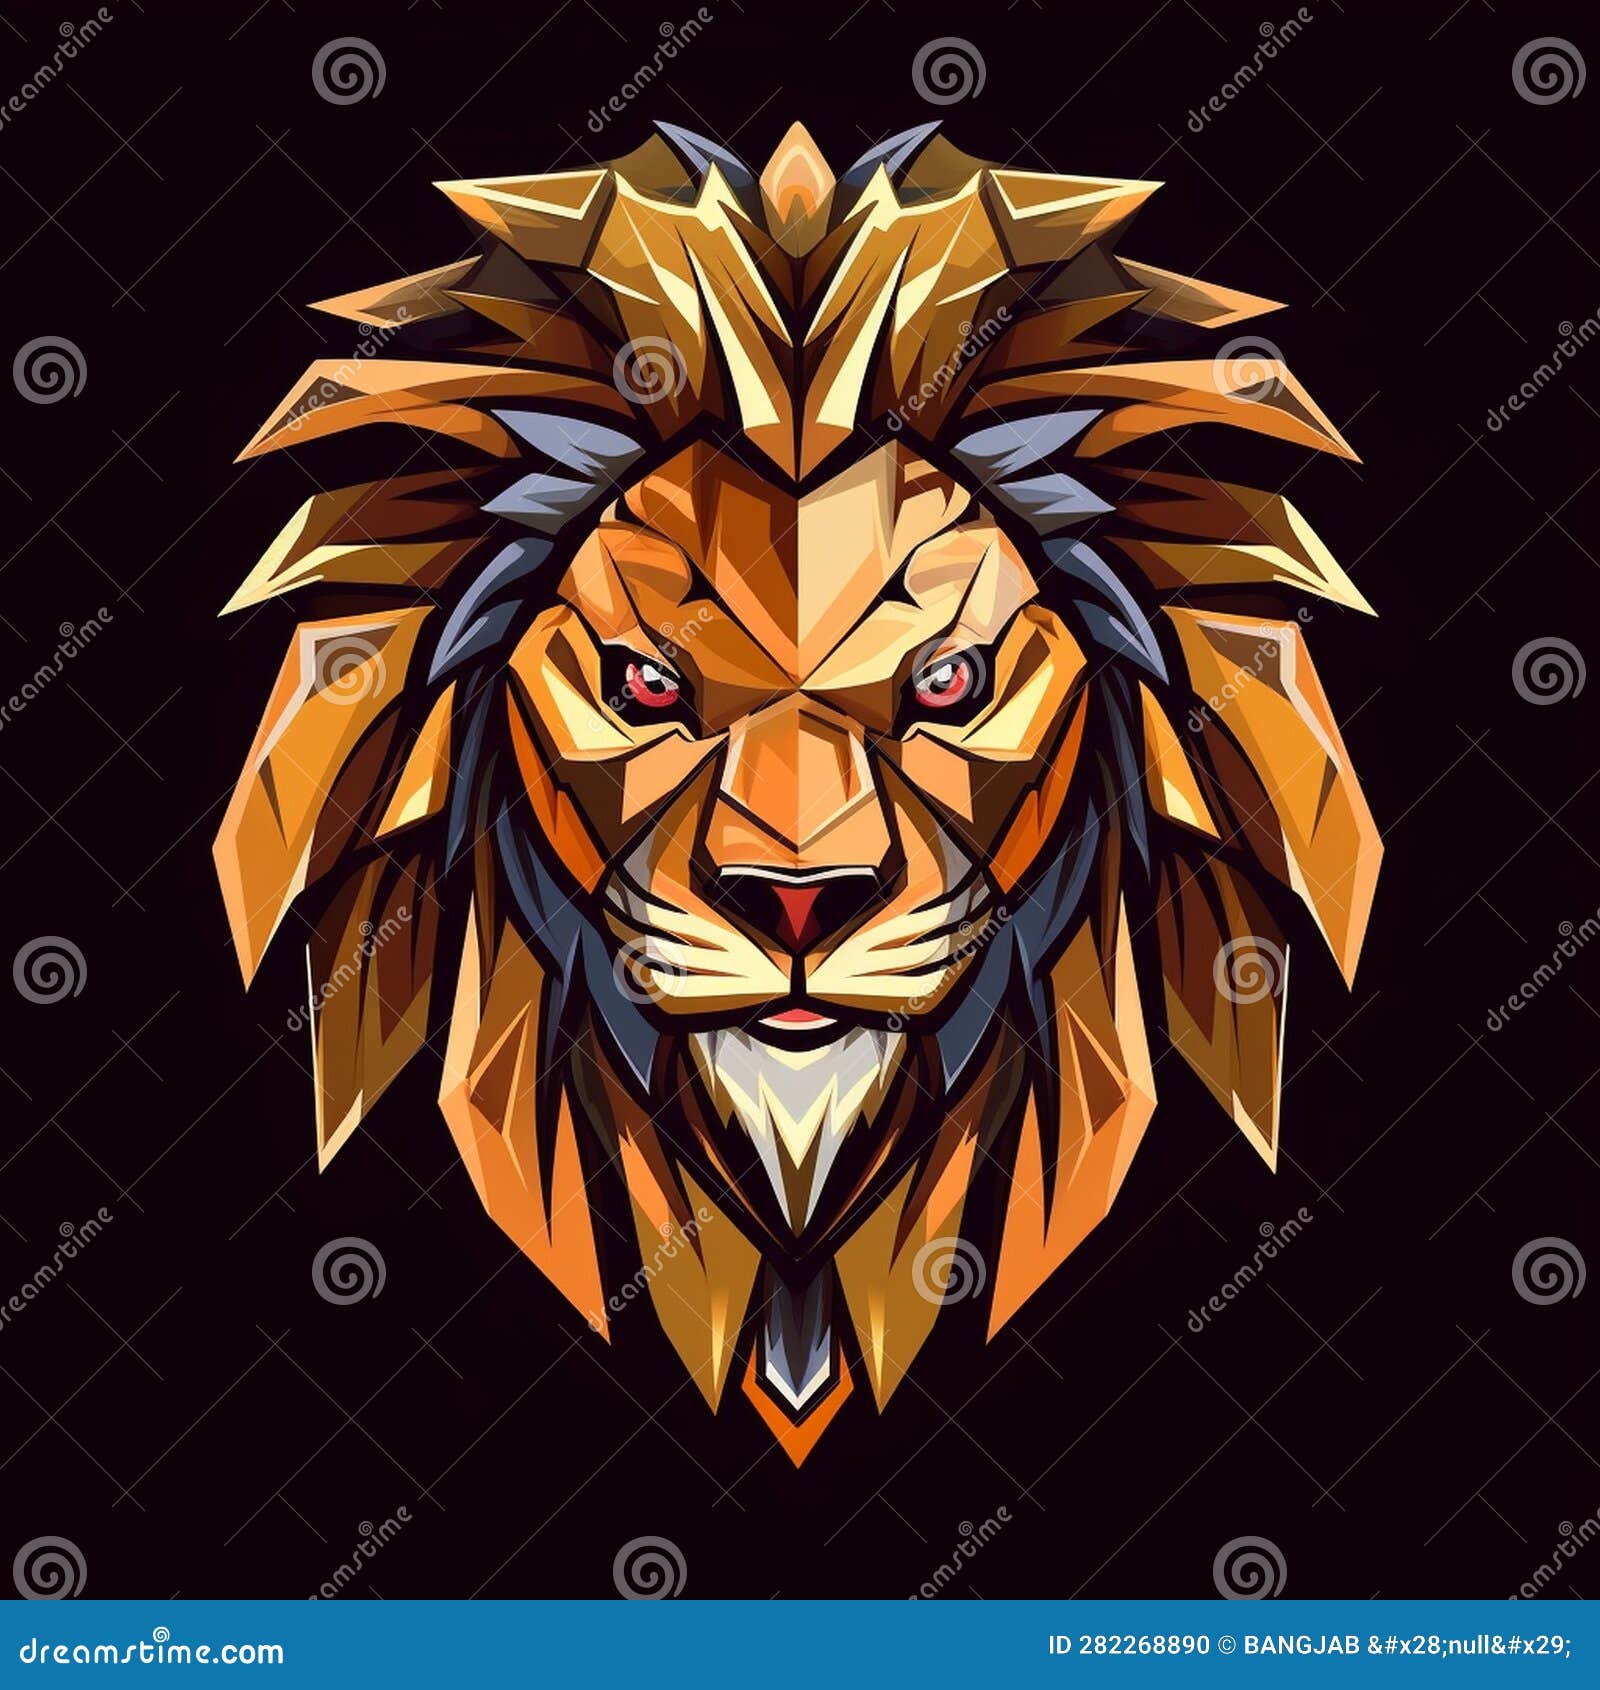 Angry Lion Esport Gaming Logo Stock Vector (Royalty Free) 2233835217 |  Shutterstock